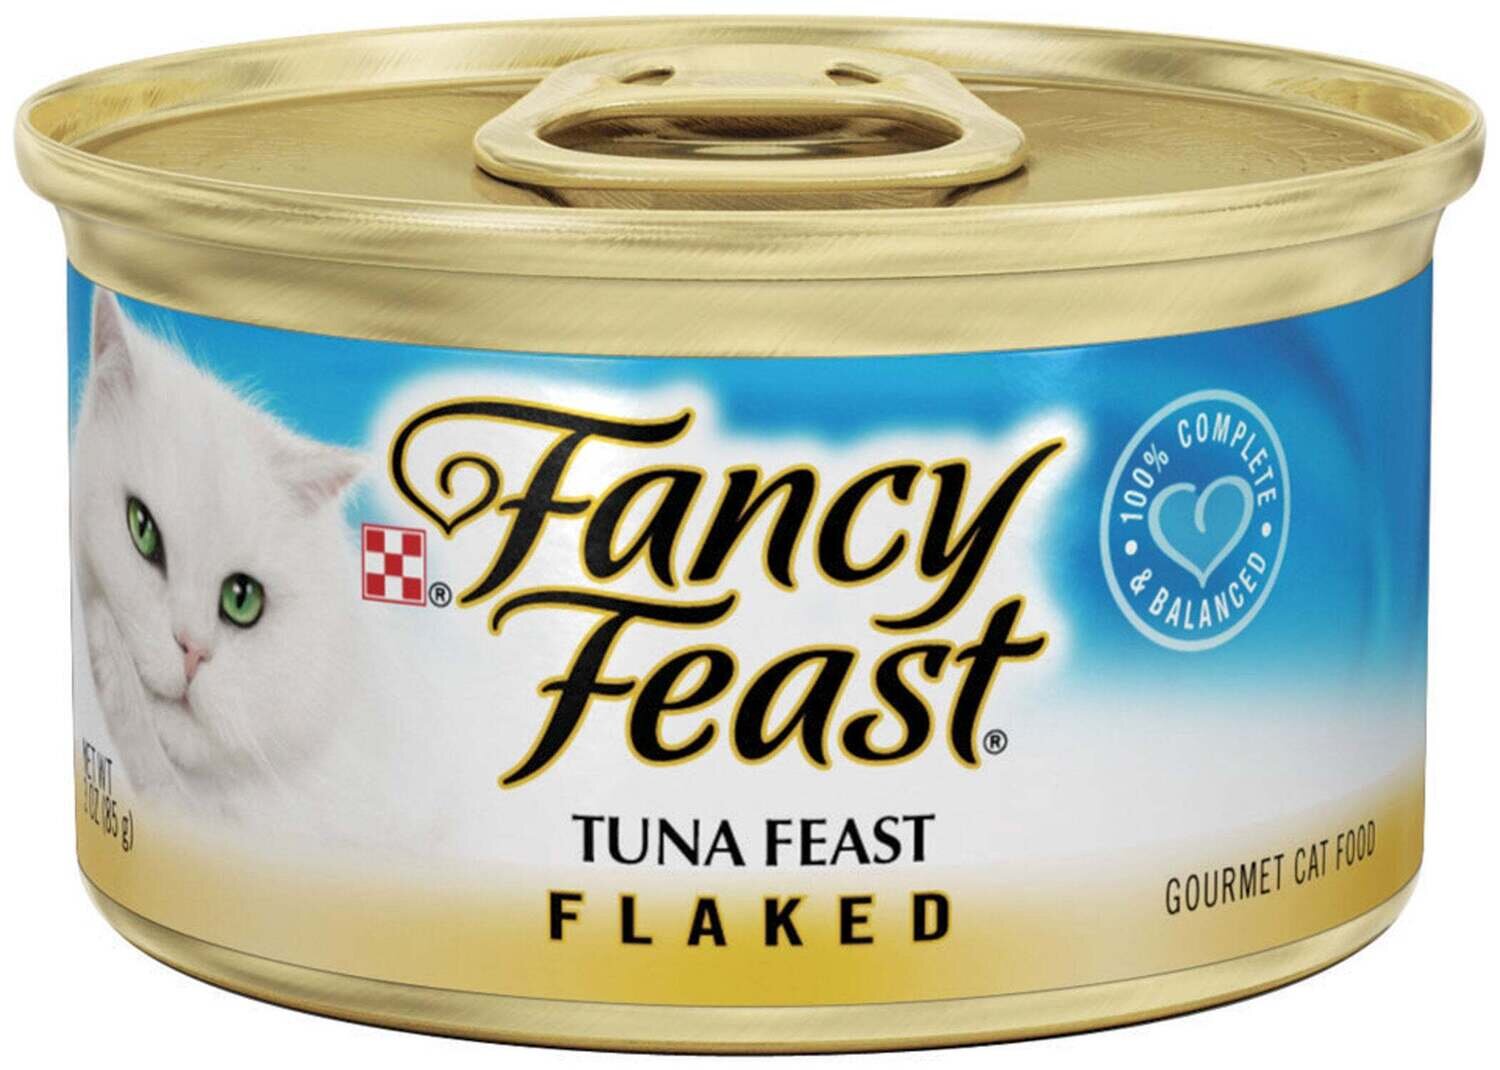 Fancy Feast Flaked Tuna Canned Cat Food 3-oz, case of 24